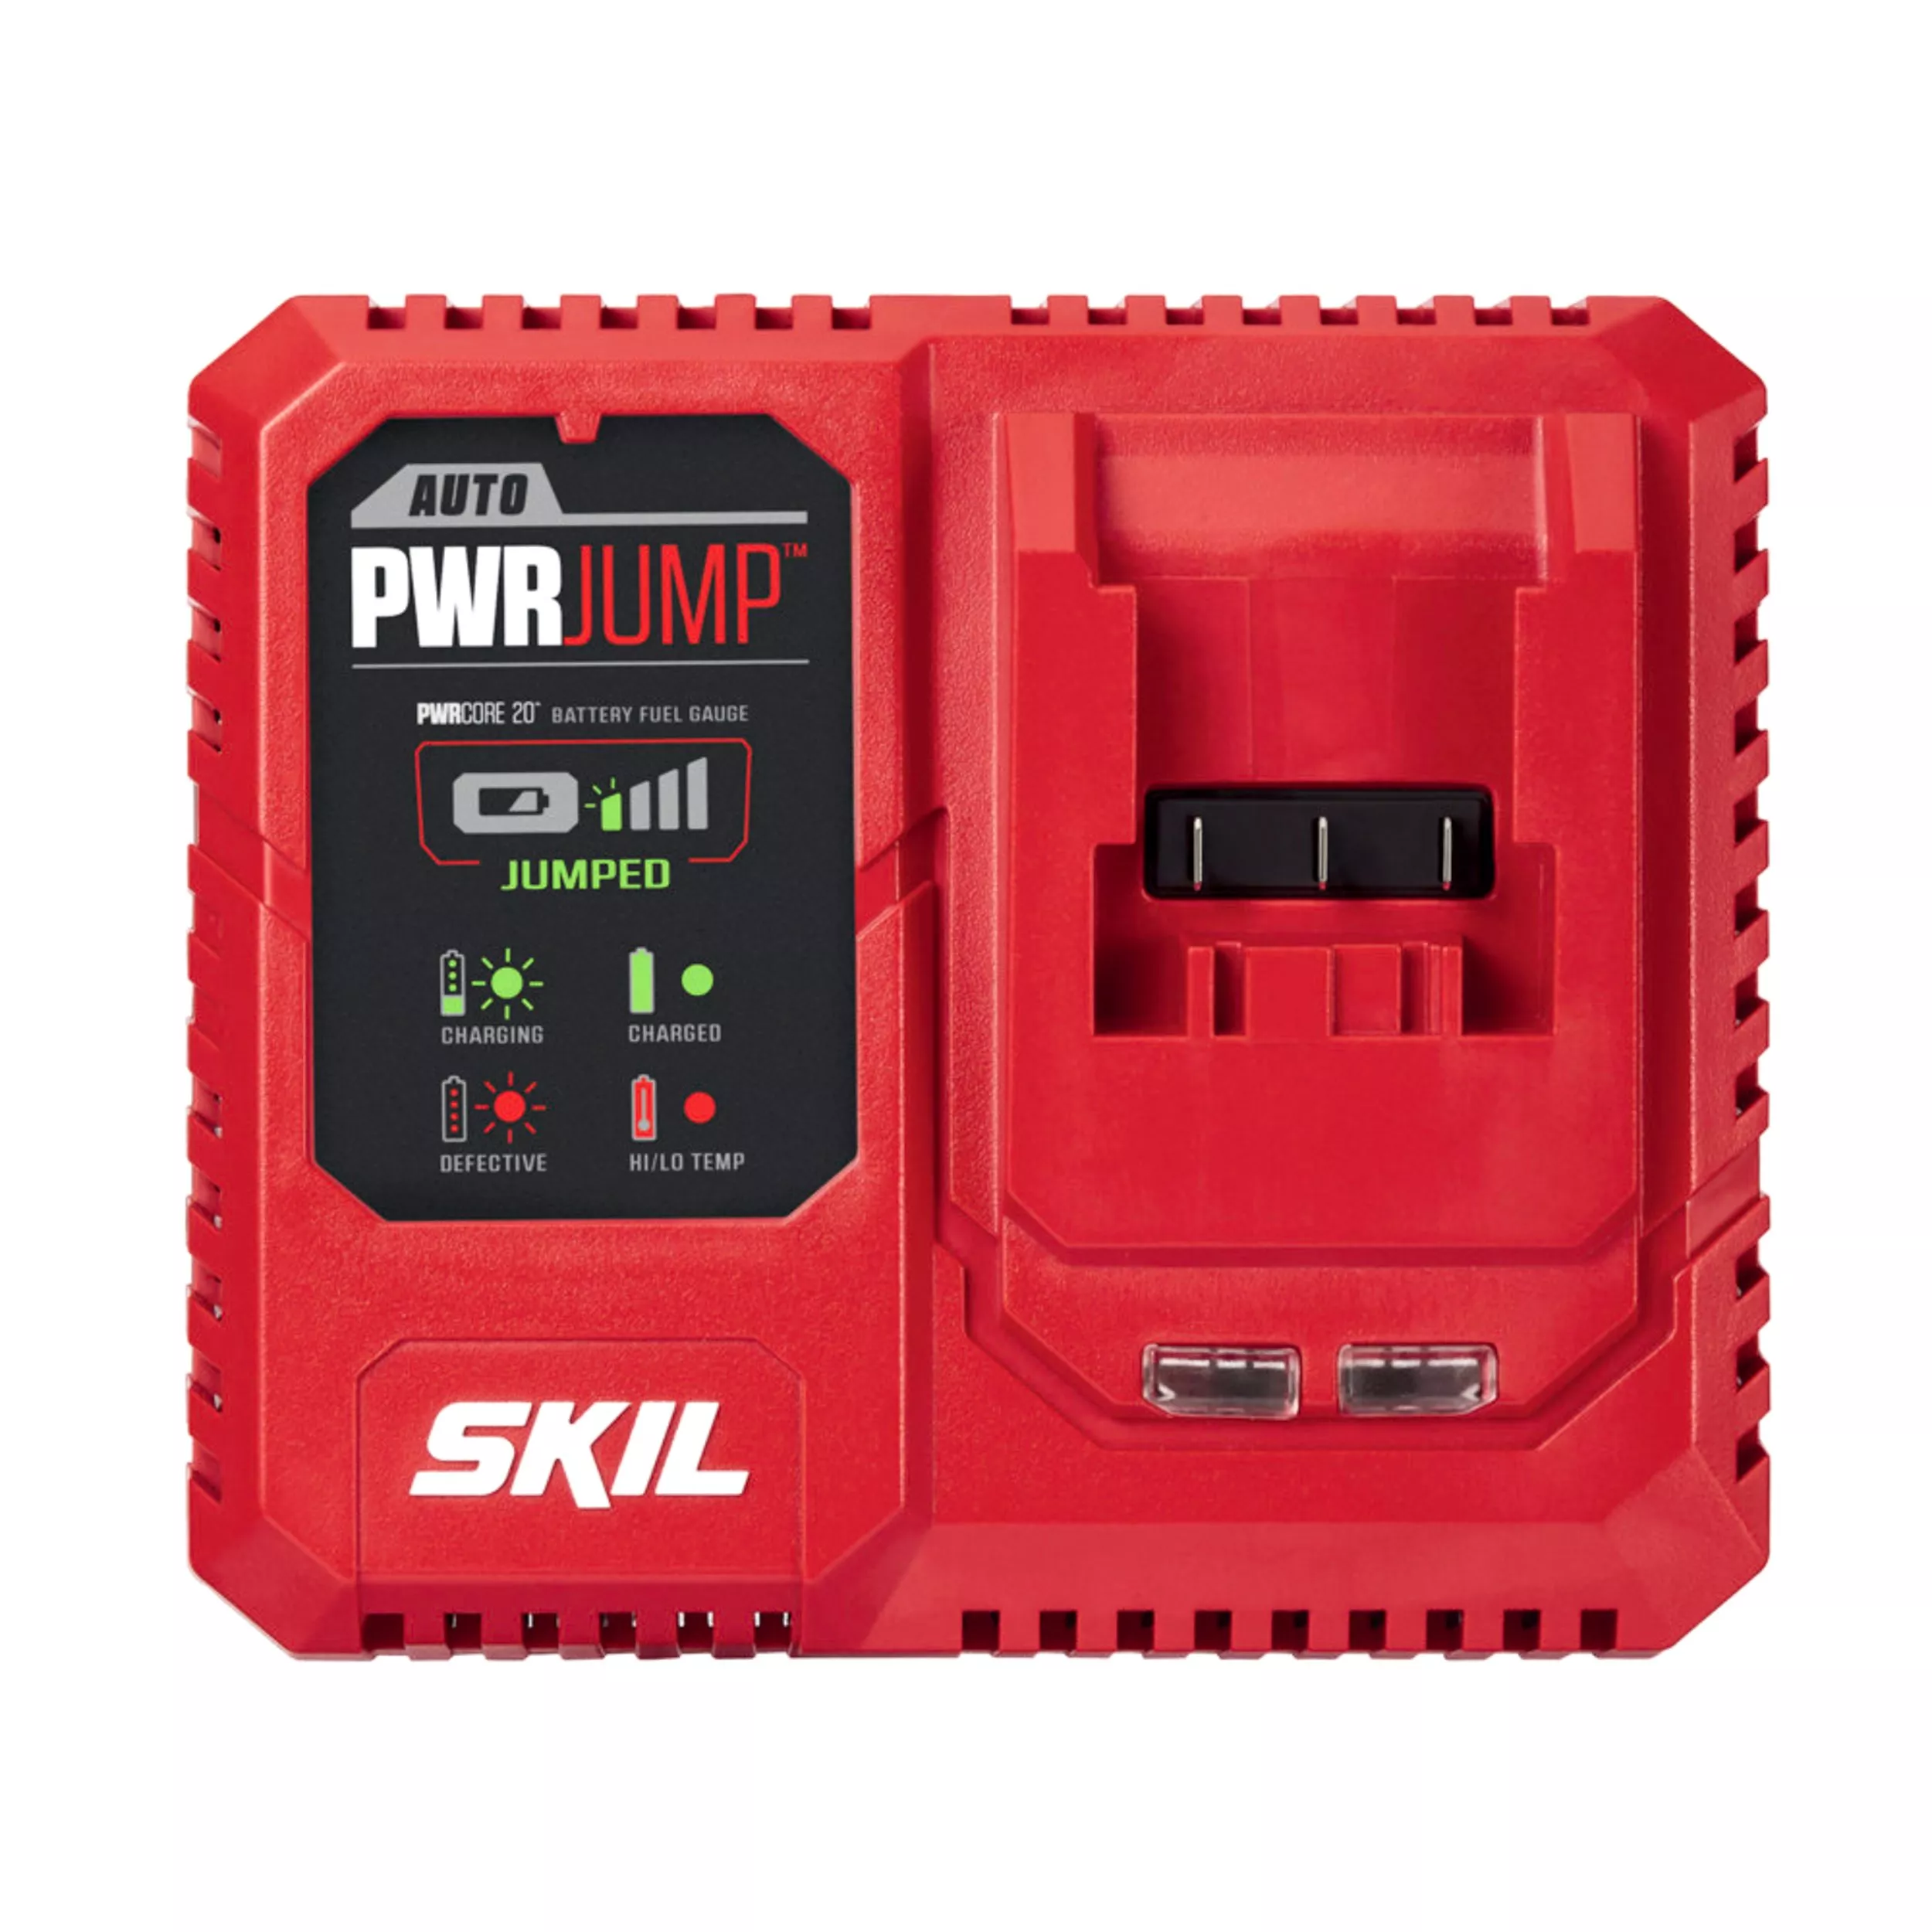 Skil PWR CORE 20 Auto PWR JUMP Charger